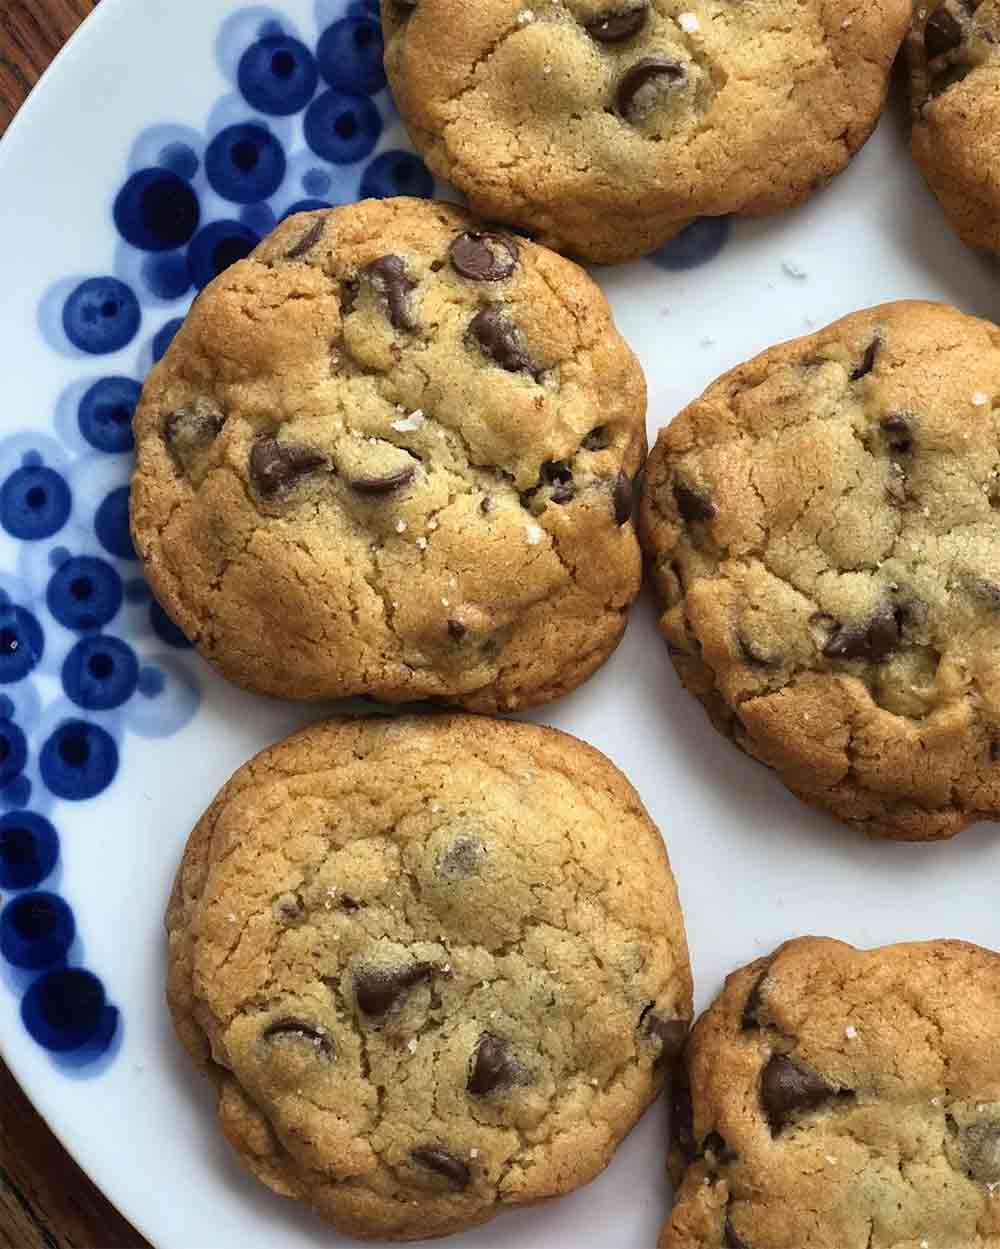 Six chocolate chip cookies on a blue and white plate